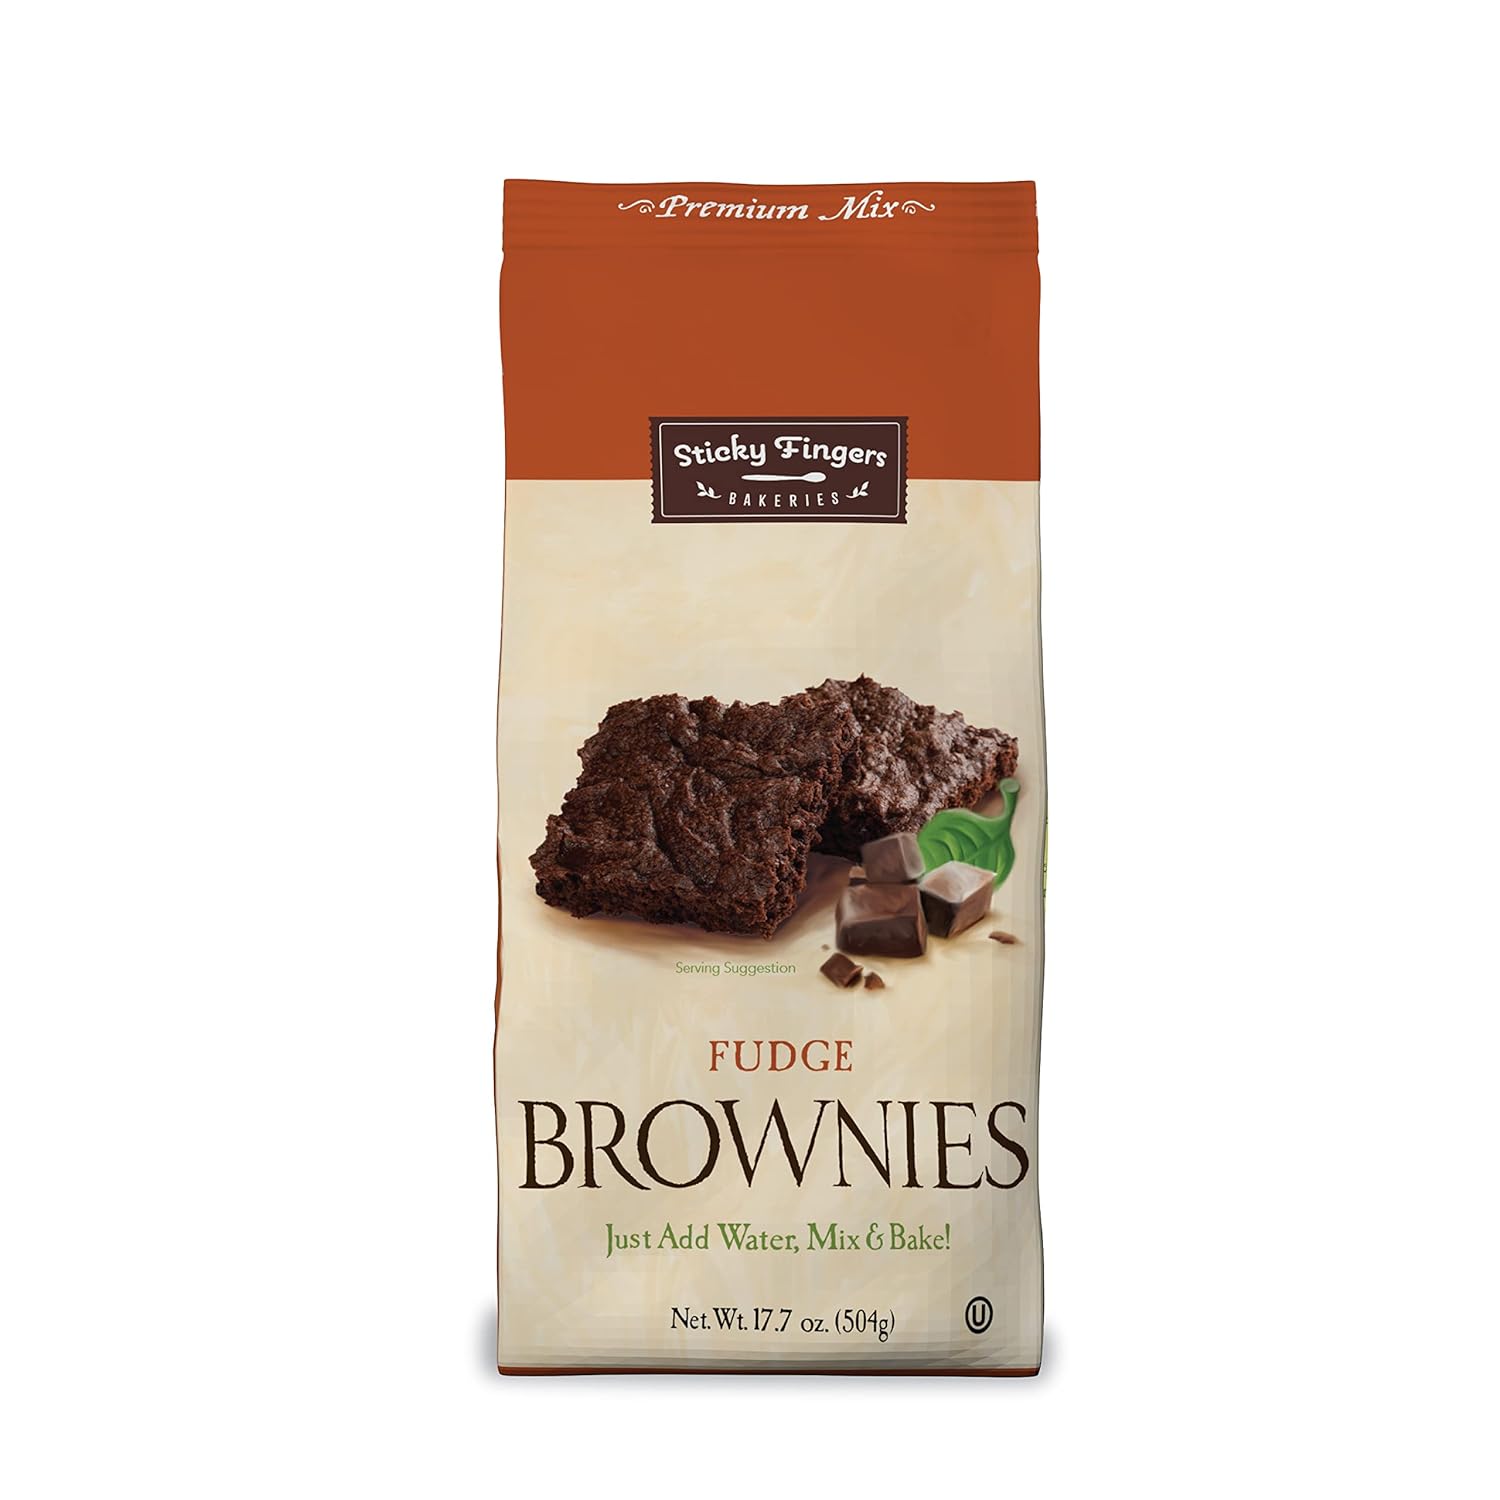 Fudge Brownie Mix by Sticky Fingers Bakeries – Baking Mix for Homemade Chocolate Fudge Brownies, Made with Semi Sweet Chocolate Chips, Makes 16 Brownies Per Pack